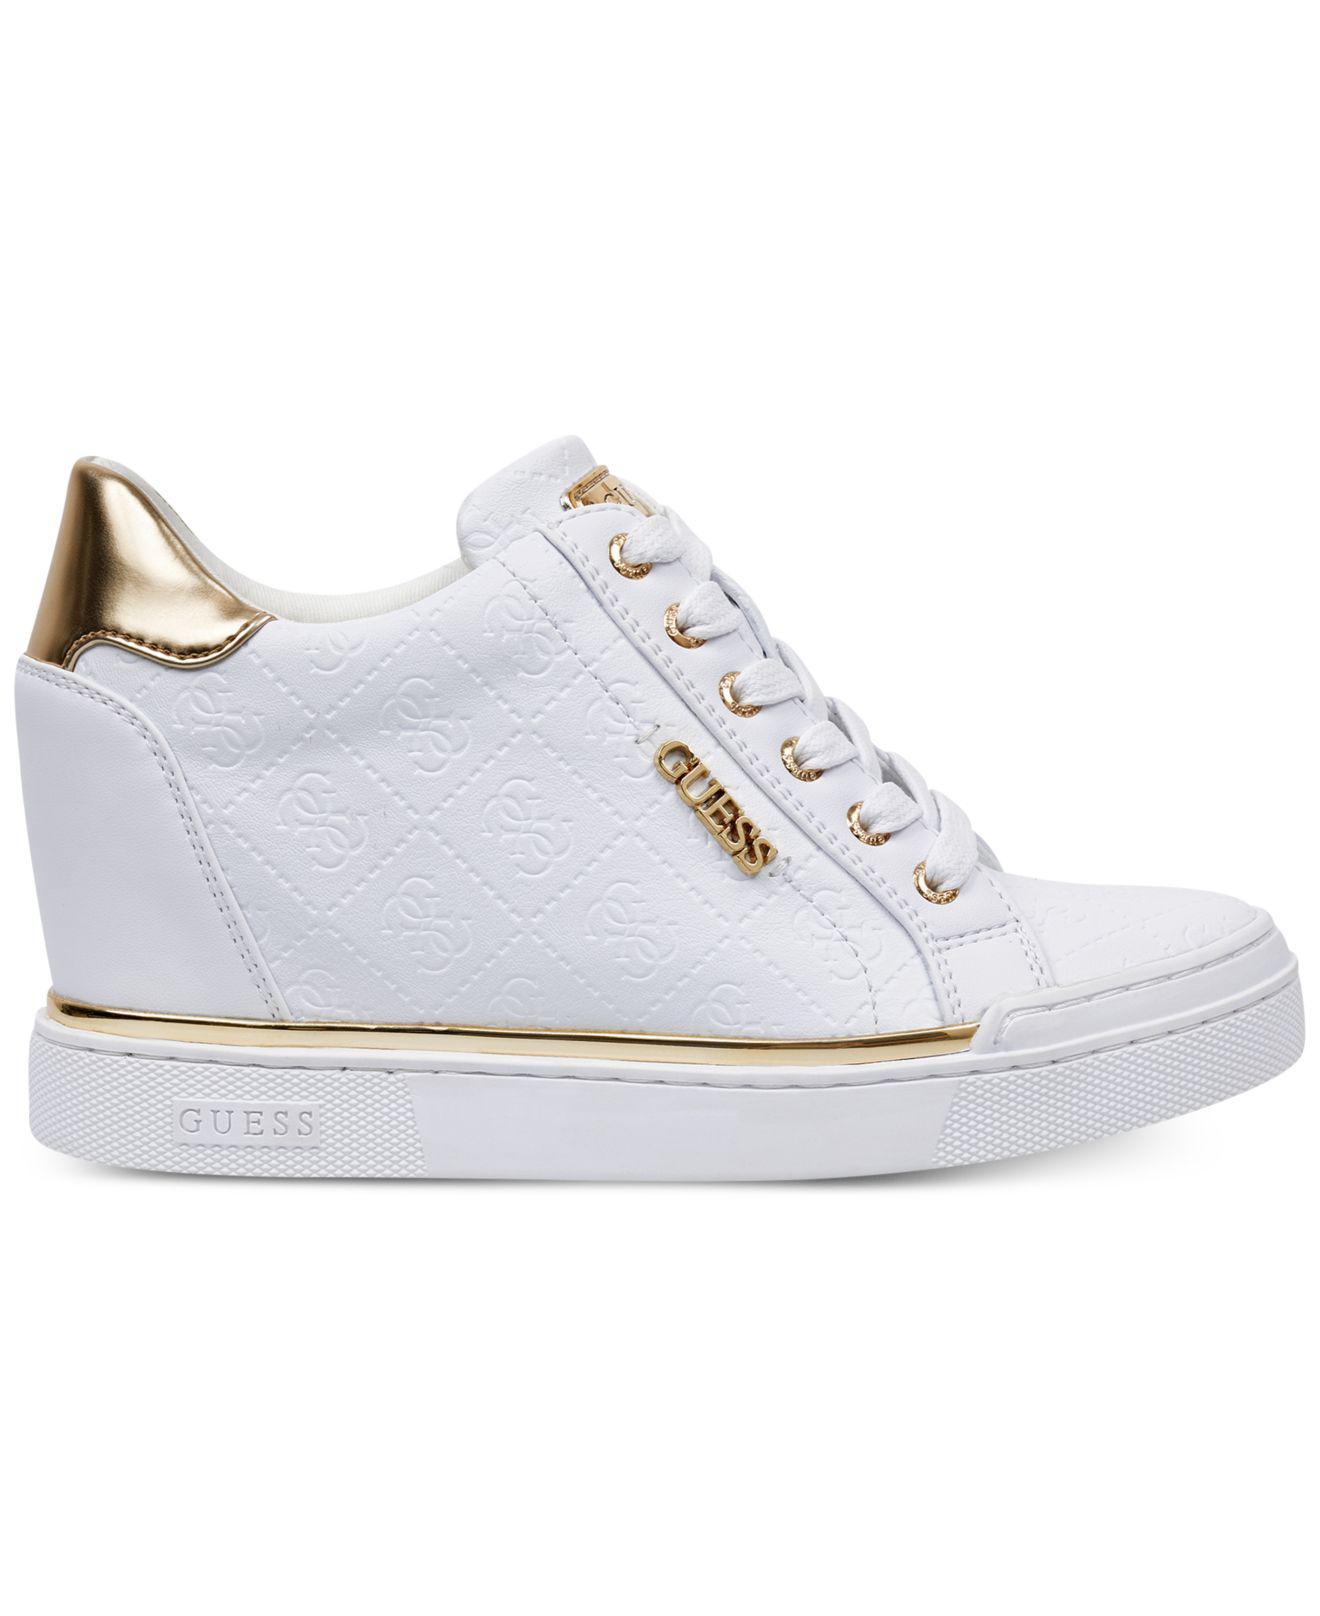 produktion For det andet guitar Guess Flowurs Wedge Sneakers in White | Lyst